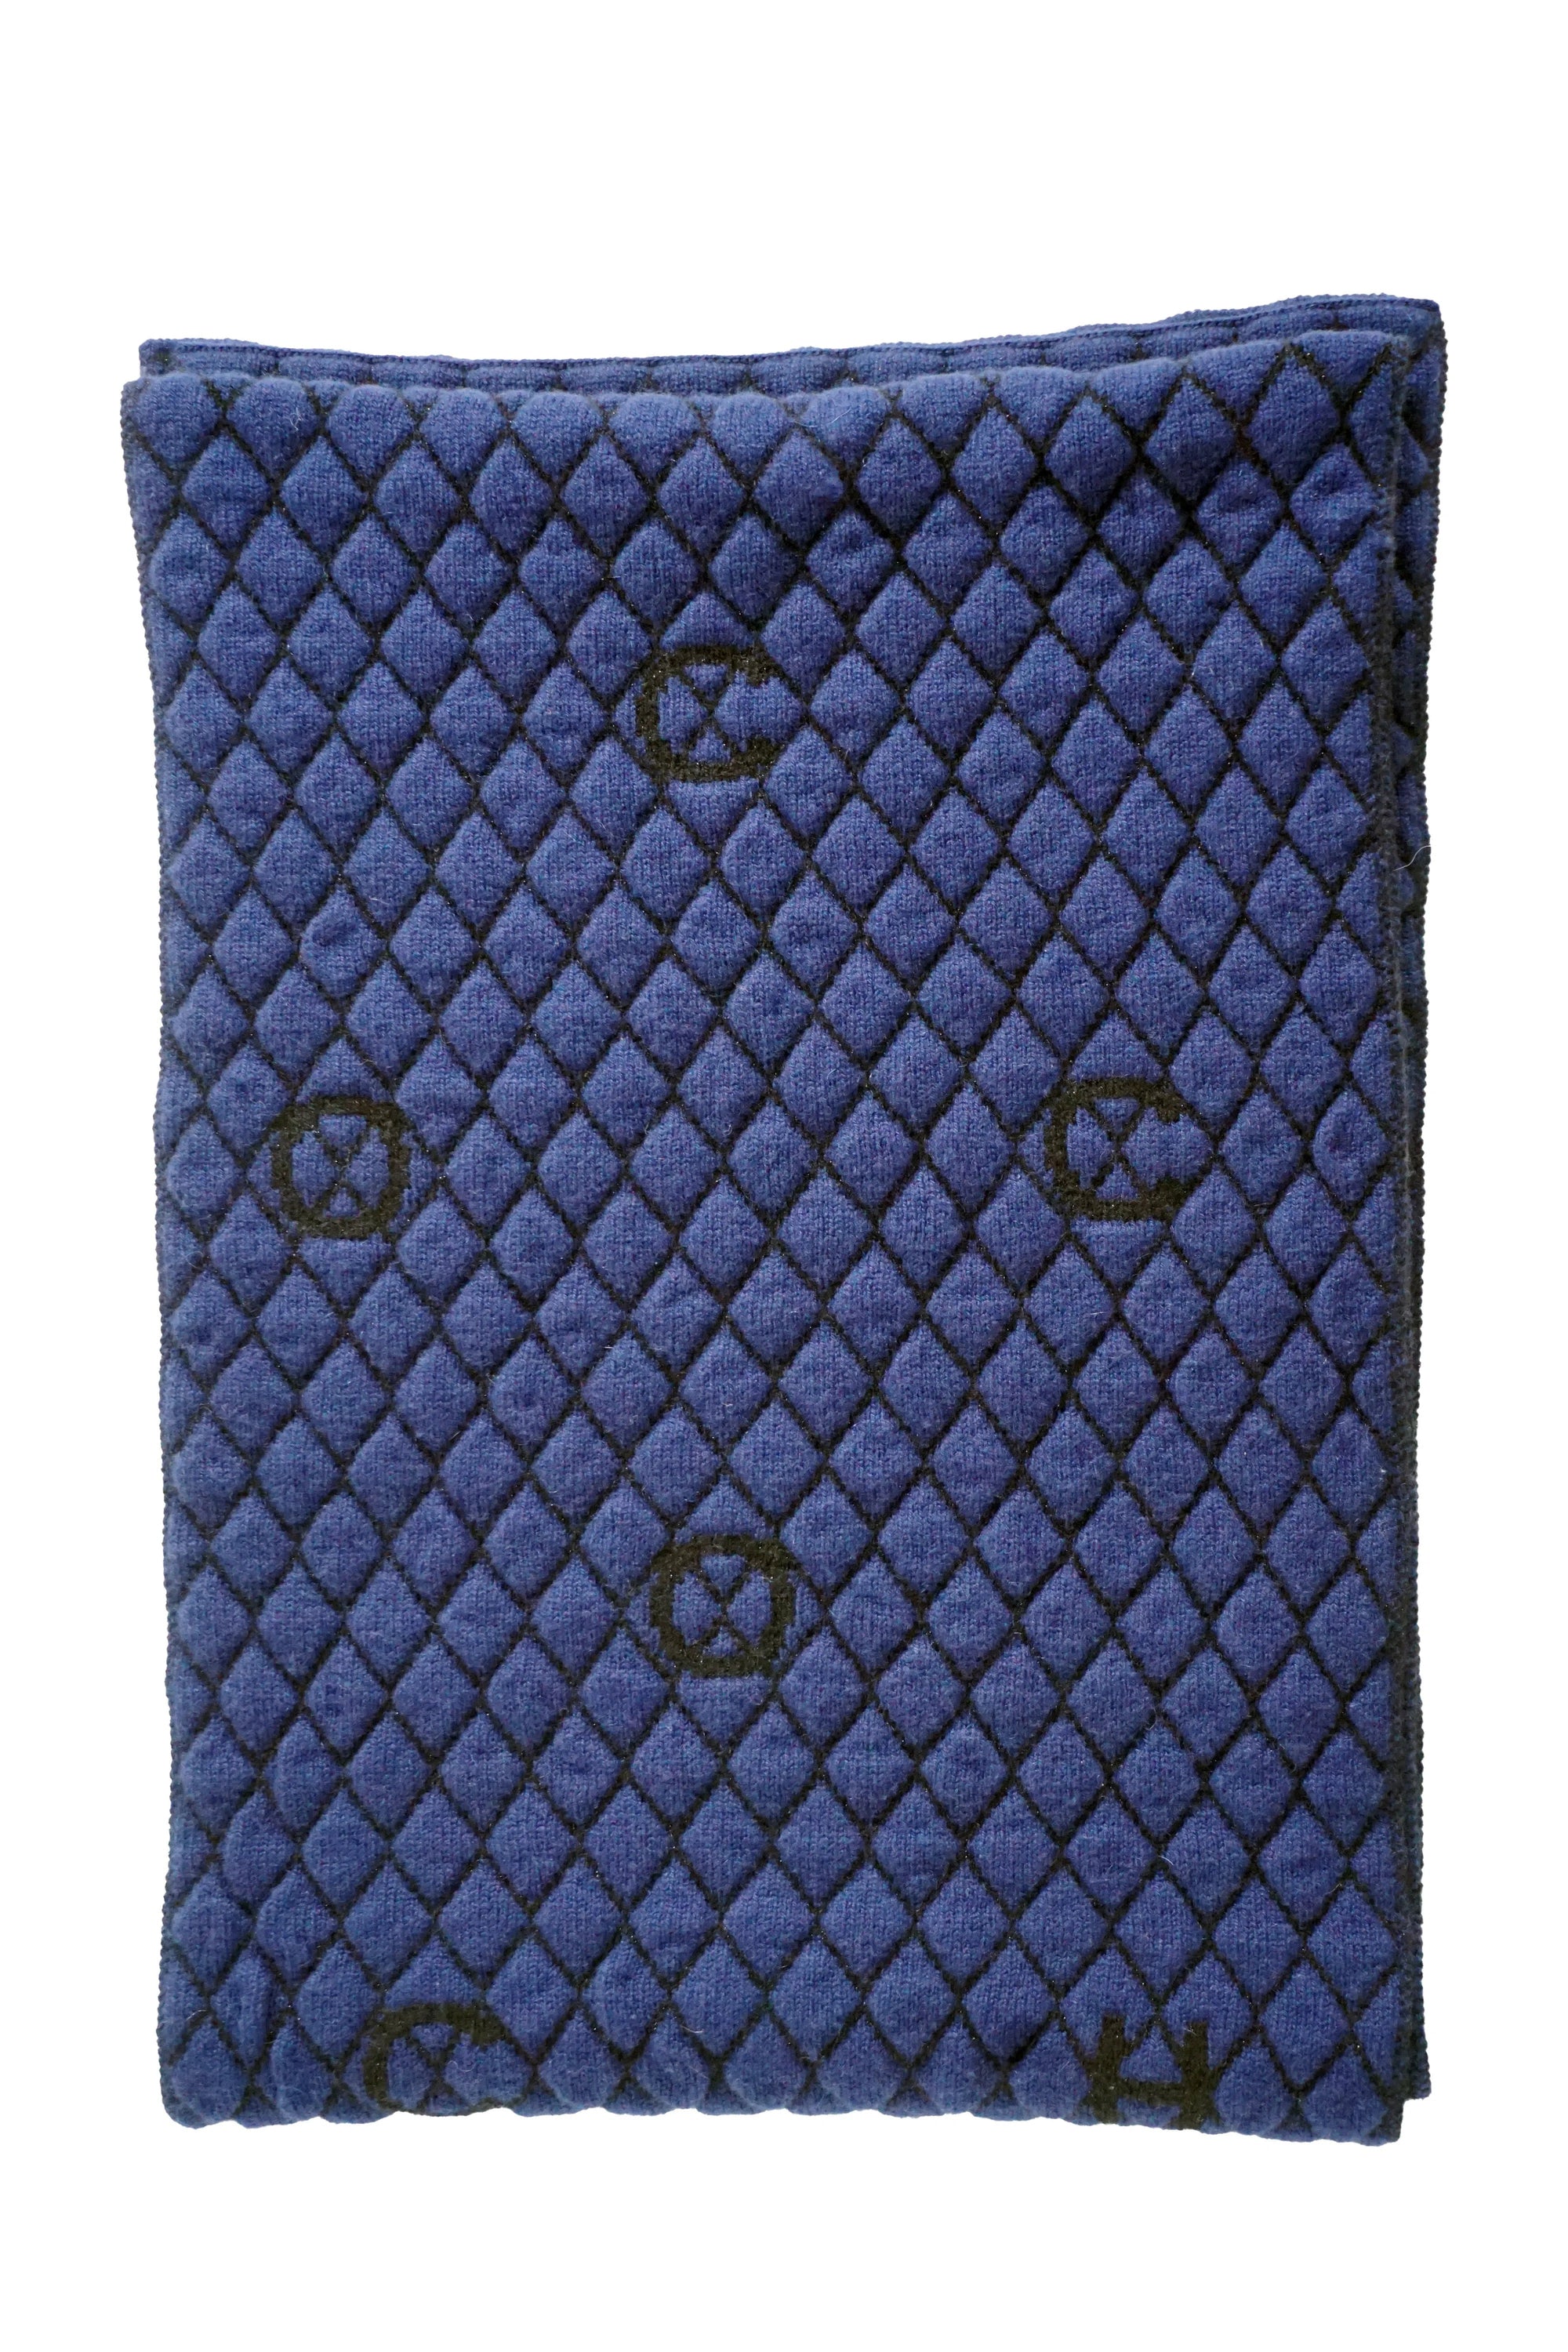 Chanel Quilted Design C H A N E L Letters Oblong Cashmere Scarf - Navy - Foxy Couture Carmel